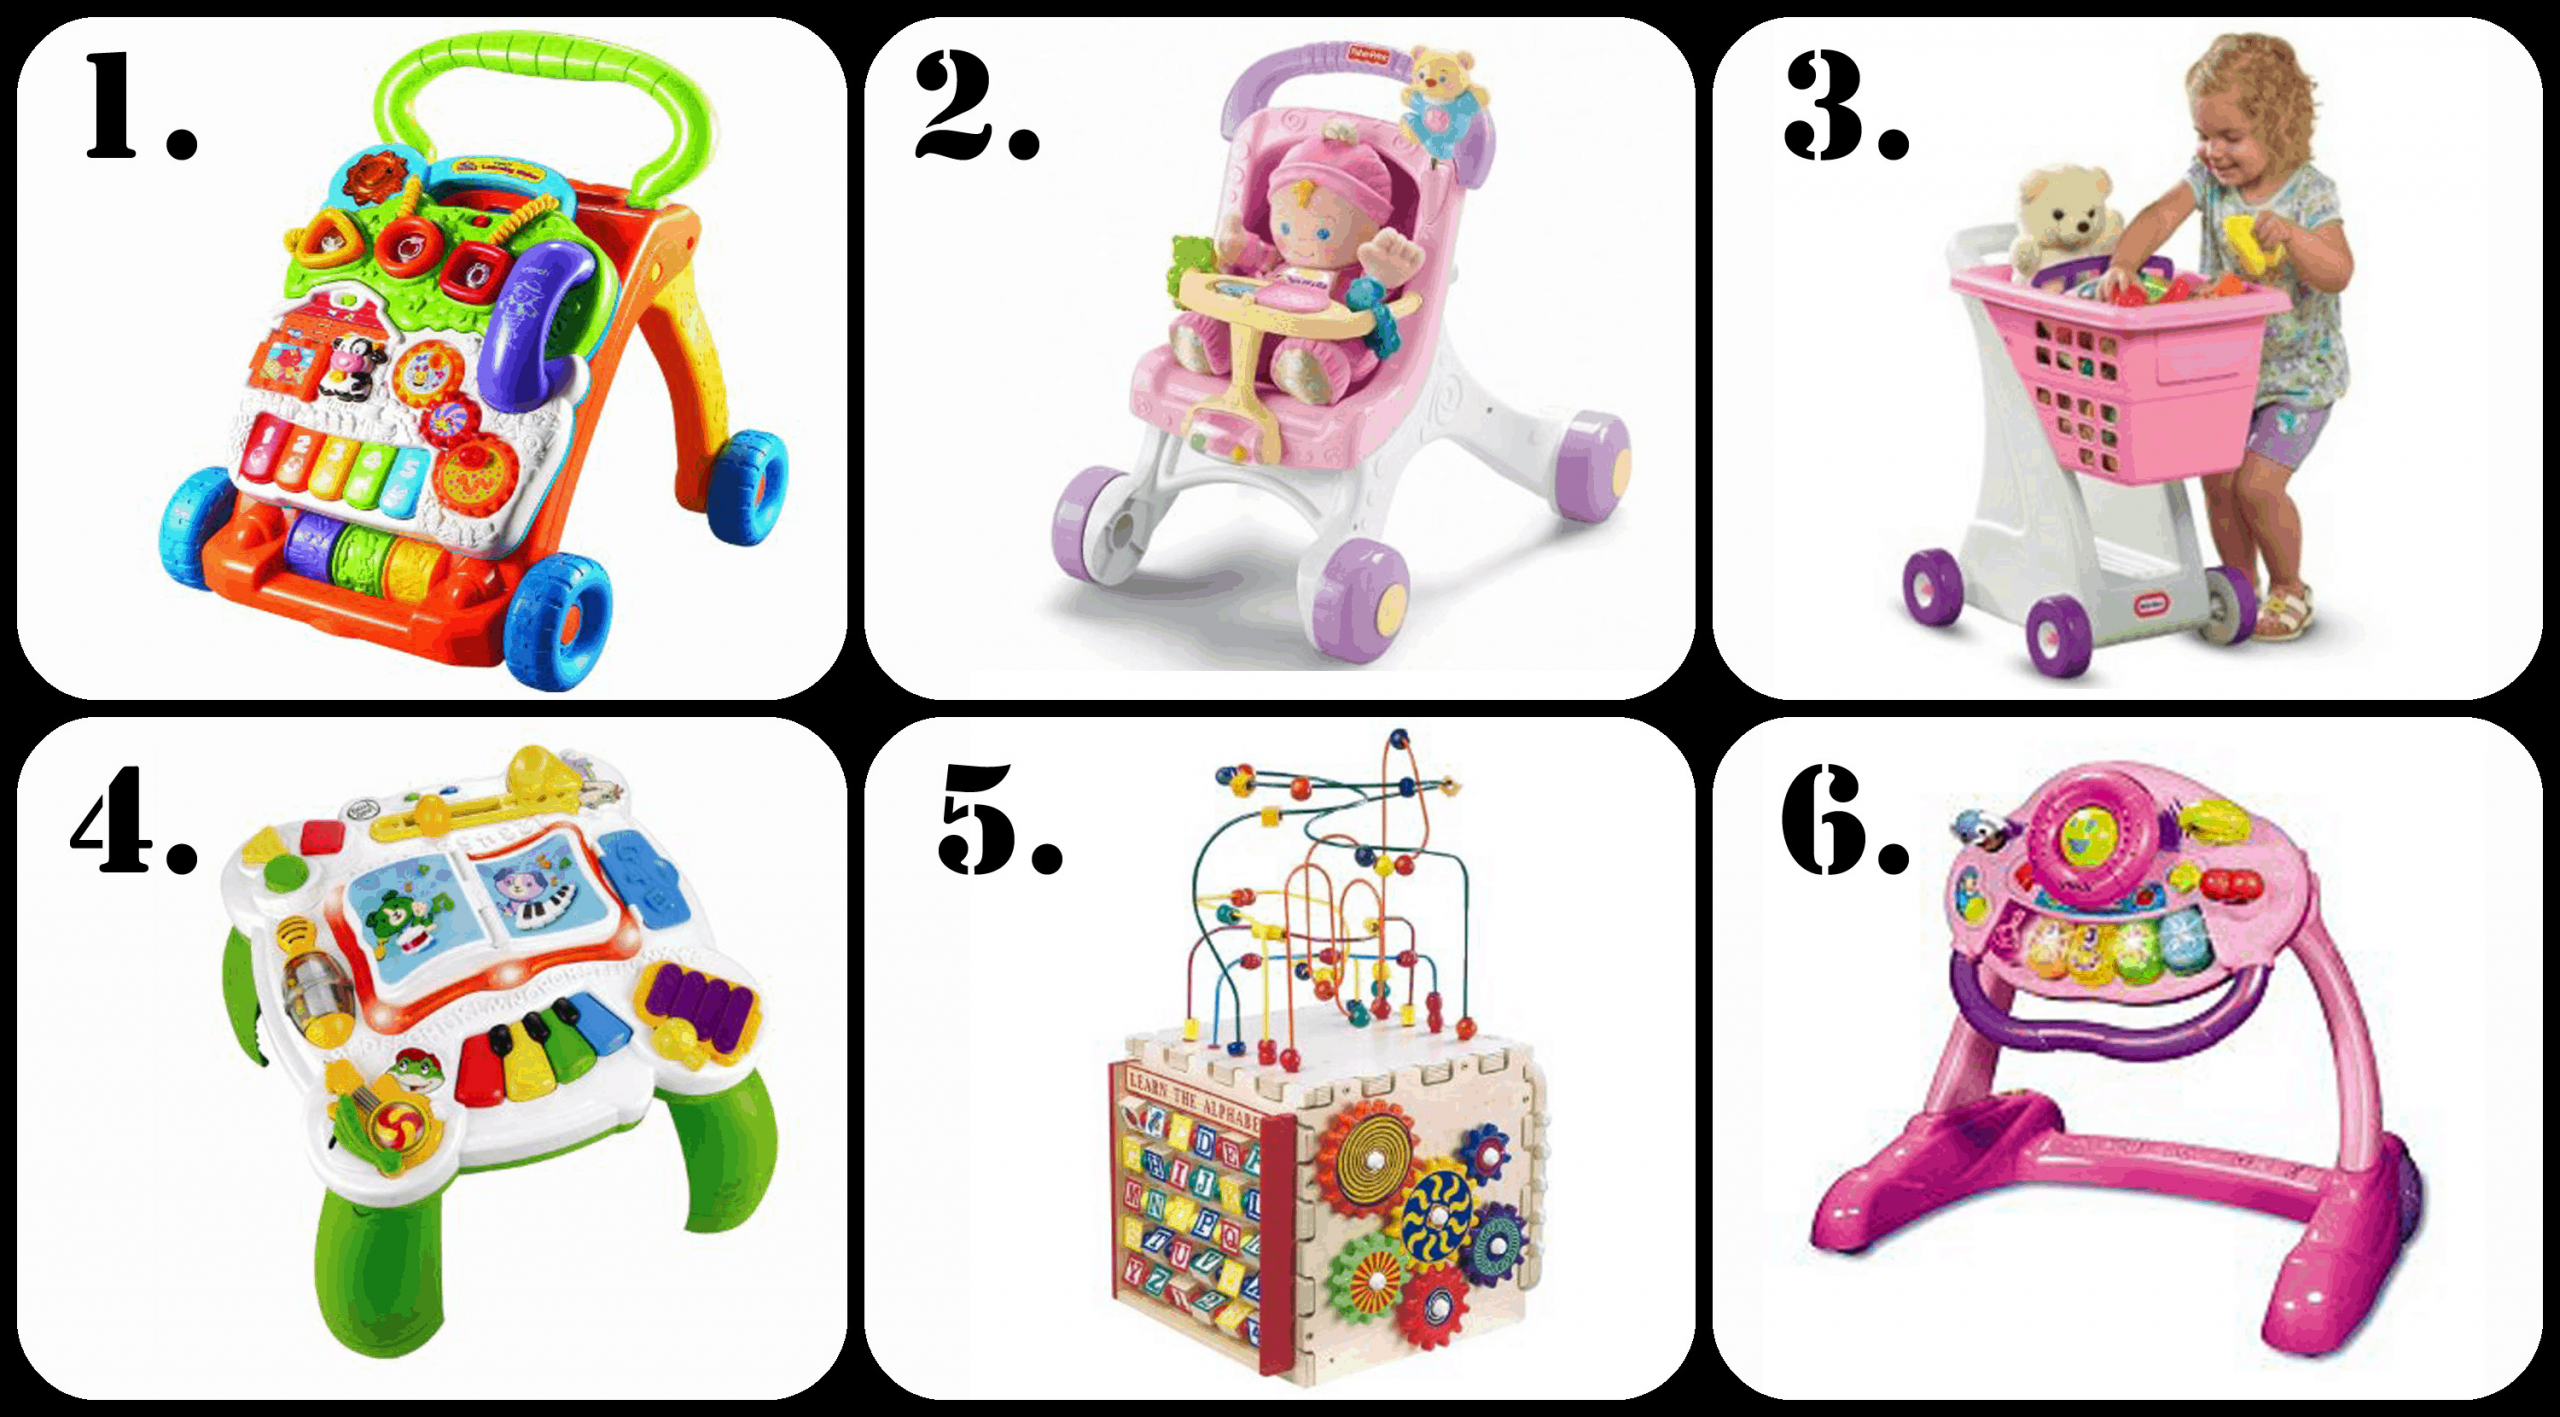 Gift Ideas For 1 Year Old Girls
 The Ultimate List of Gift Ideas for a 1 Year Old Girl